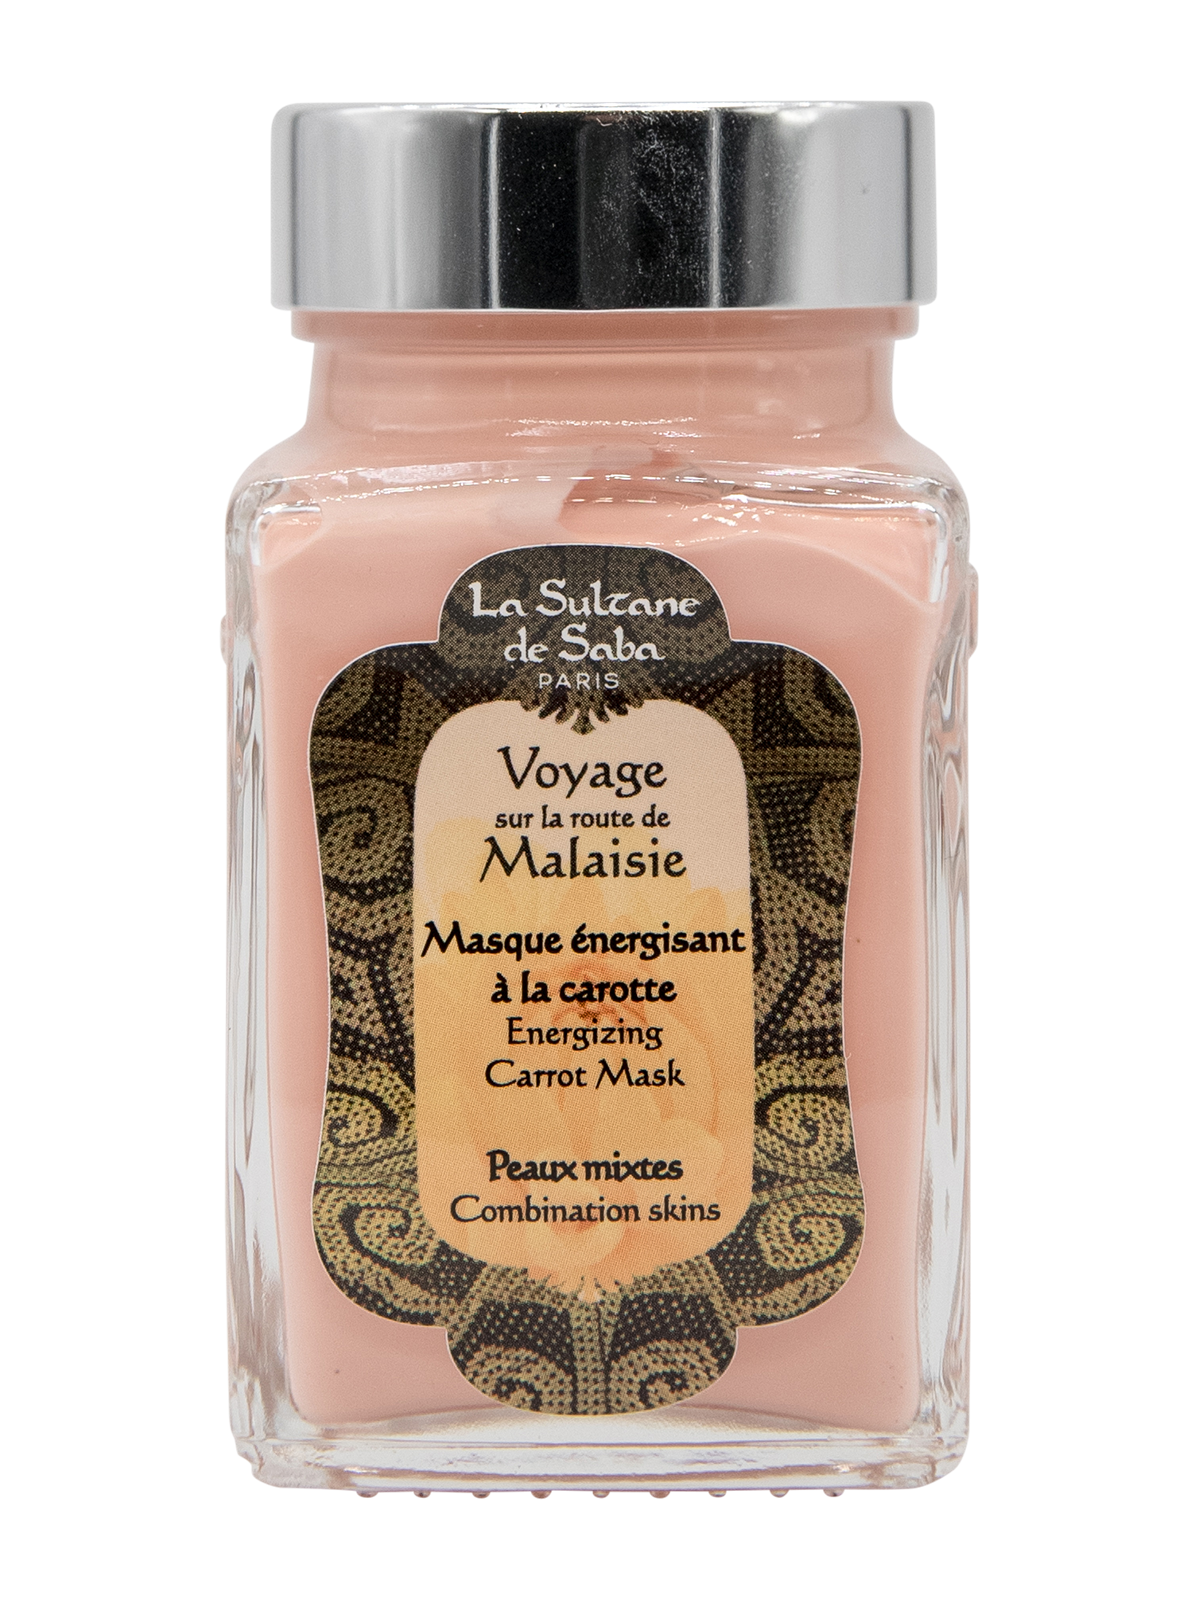 Energizing Carrot Mask - Jasmine and Tropical Flowers Fragrance